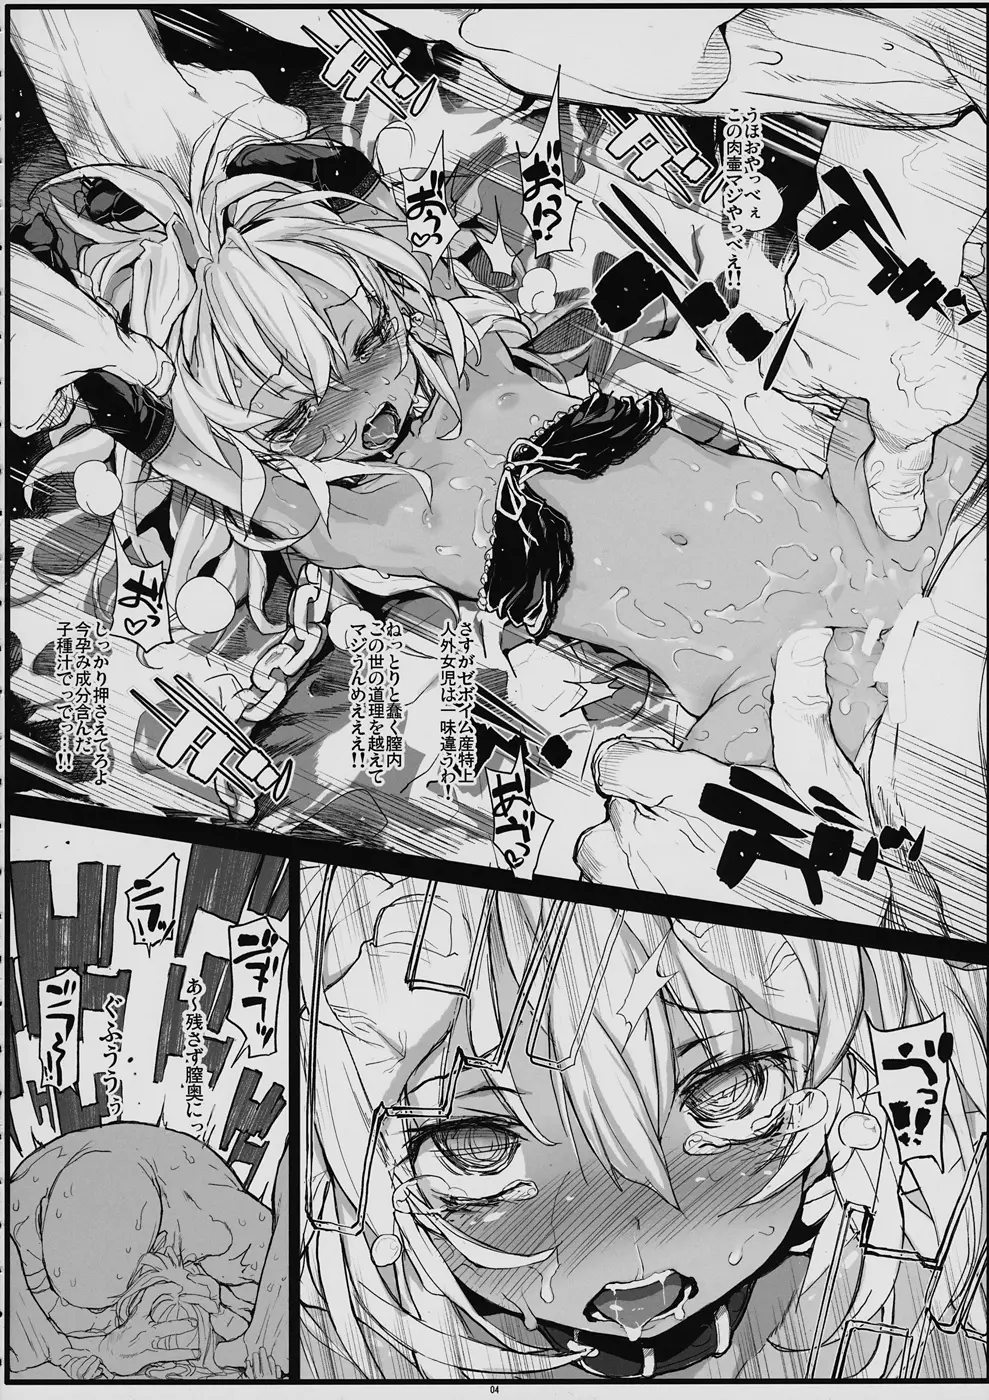 Xenogearsのエロいラクガキ本 PART 4 - page6